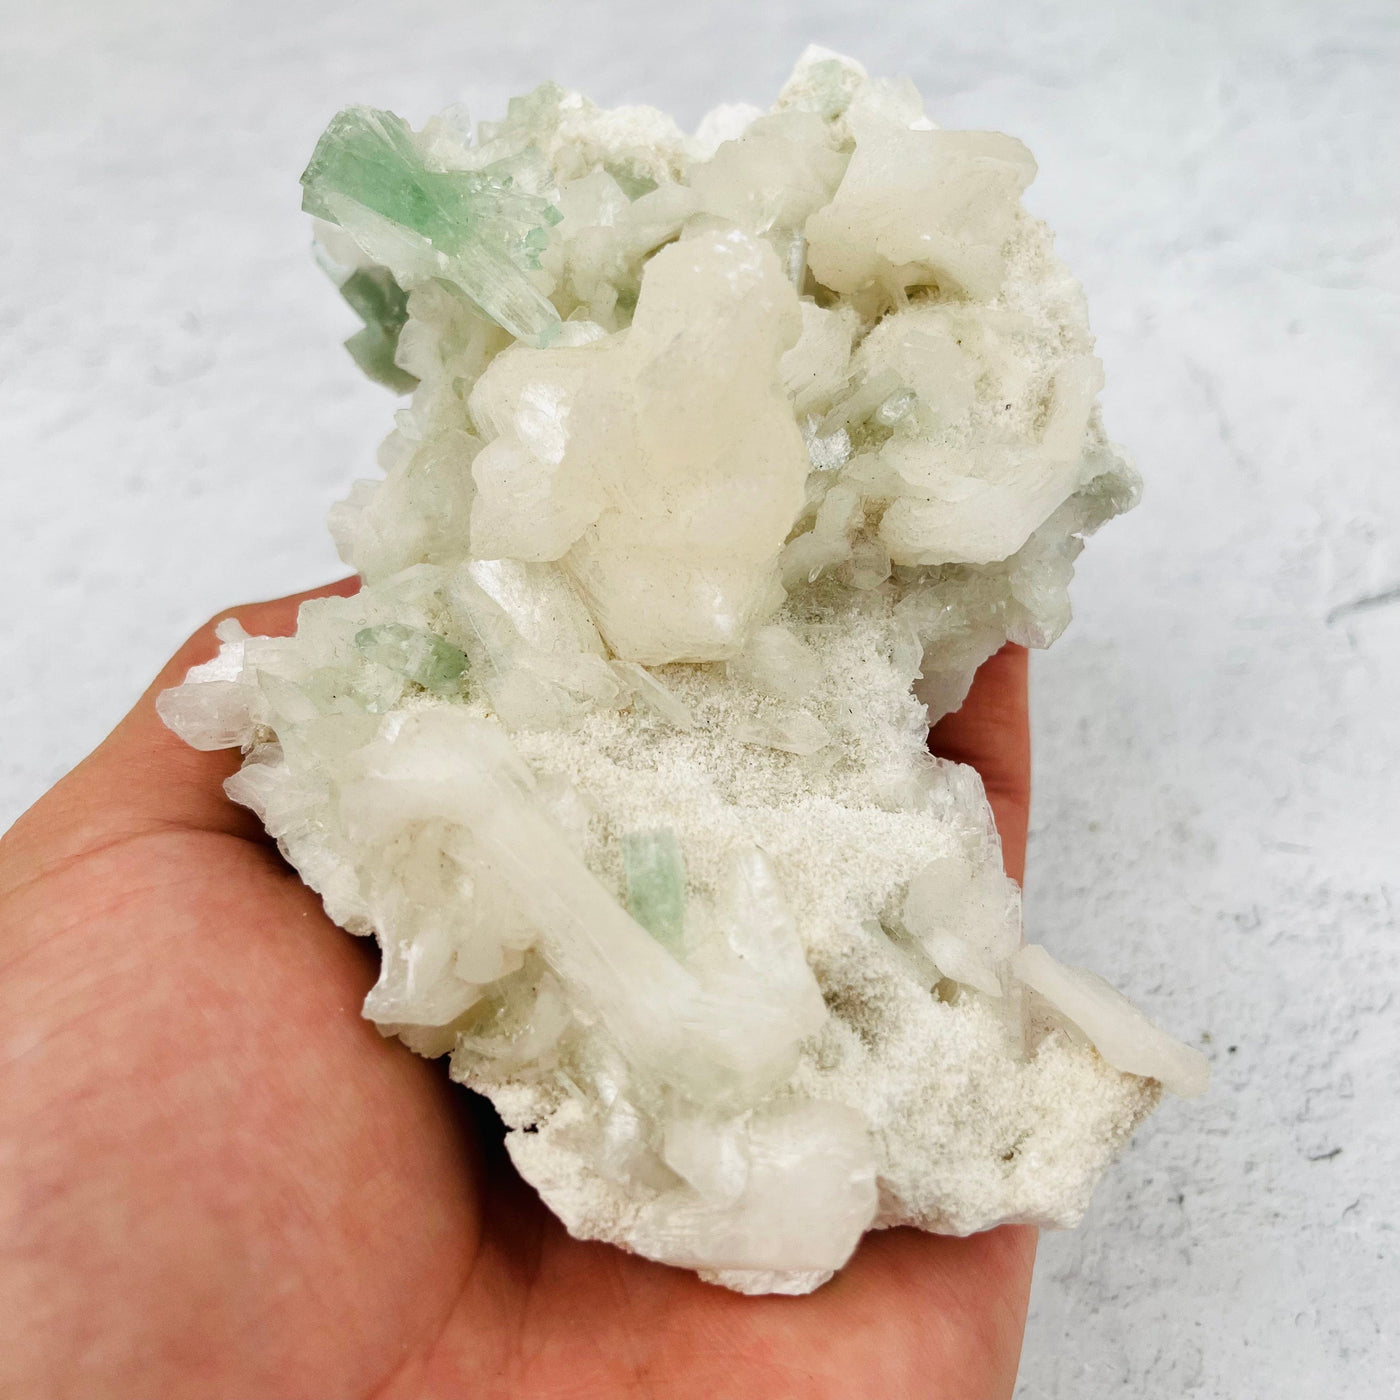 Green Apophyllite with Stilbite Zeolites - With Hand For Sizing Reference